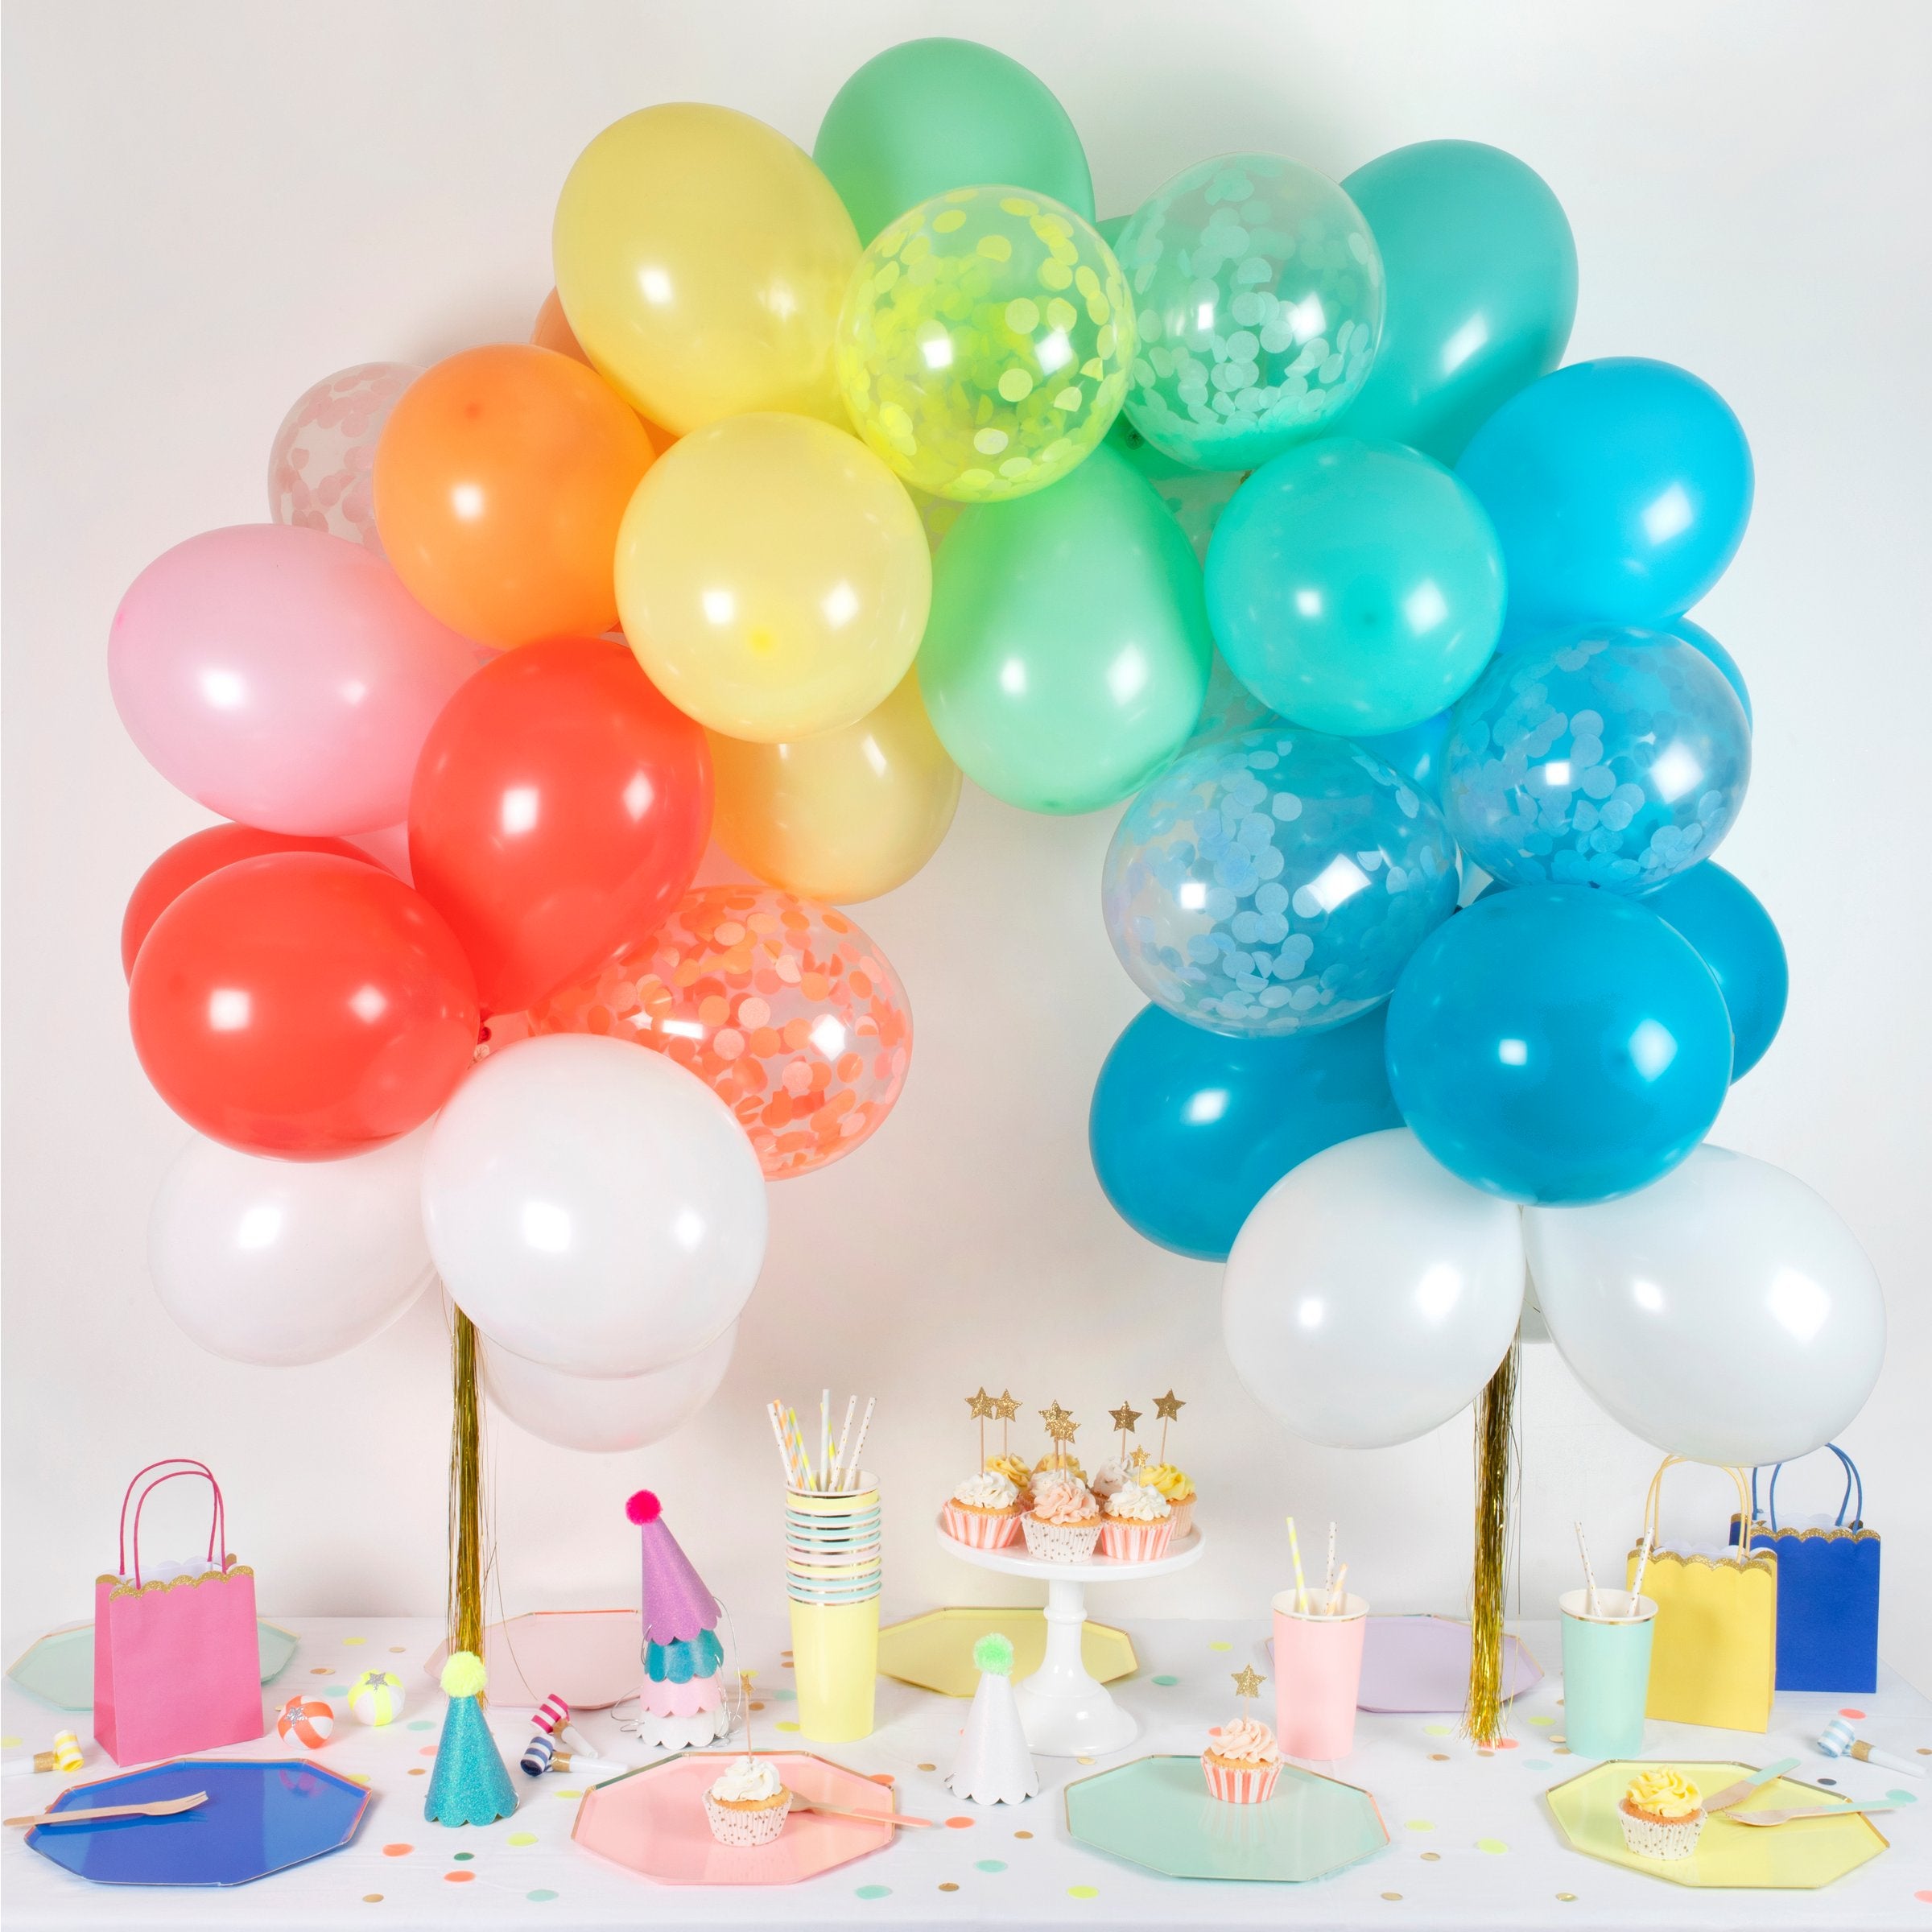 This wonderful arch includes 40 balloons, 10 of which are pre-filled with confetti, and elegant golden streamer tassels